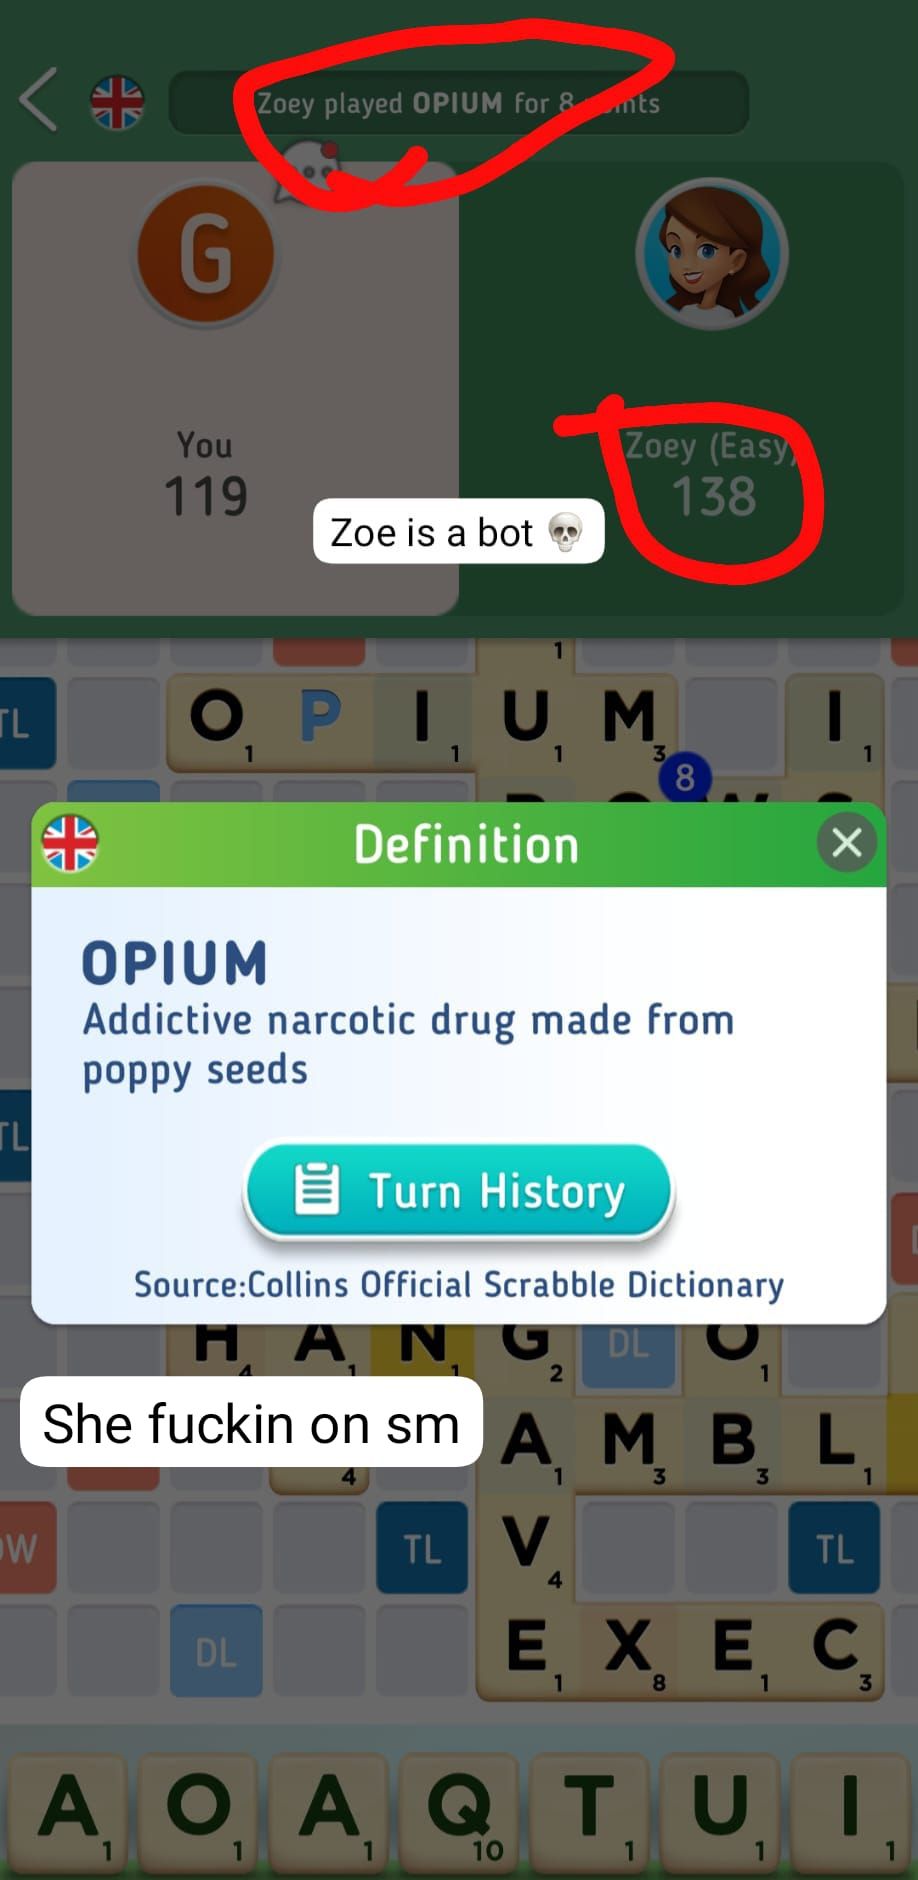 TL
TL
W
et
G
You
119
Zoey played OPIUM for 8
1
Zoe is a bot
DL
OPIUM
Definition
1
TL
A O
OAQ
1
mts
OPIUM
Addictive narcotic drug made from
poppy seeds
Zoey (Easy
138
V
4
Turn History
Source:Collins Official Scrabble Dictionary
DL
2
ΠΑΝ
She fuckin on sm A M B. L
3
1
TL
10
3
8
8
X
EX E C
1
3
QTUI
1
1